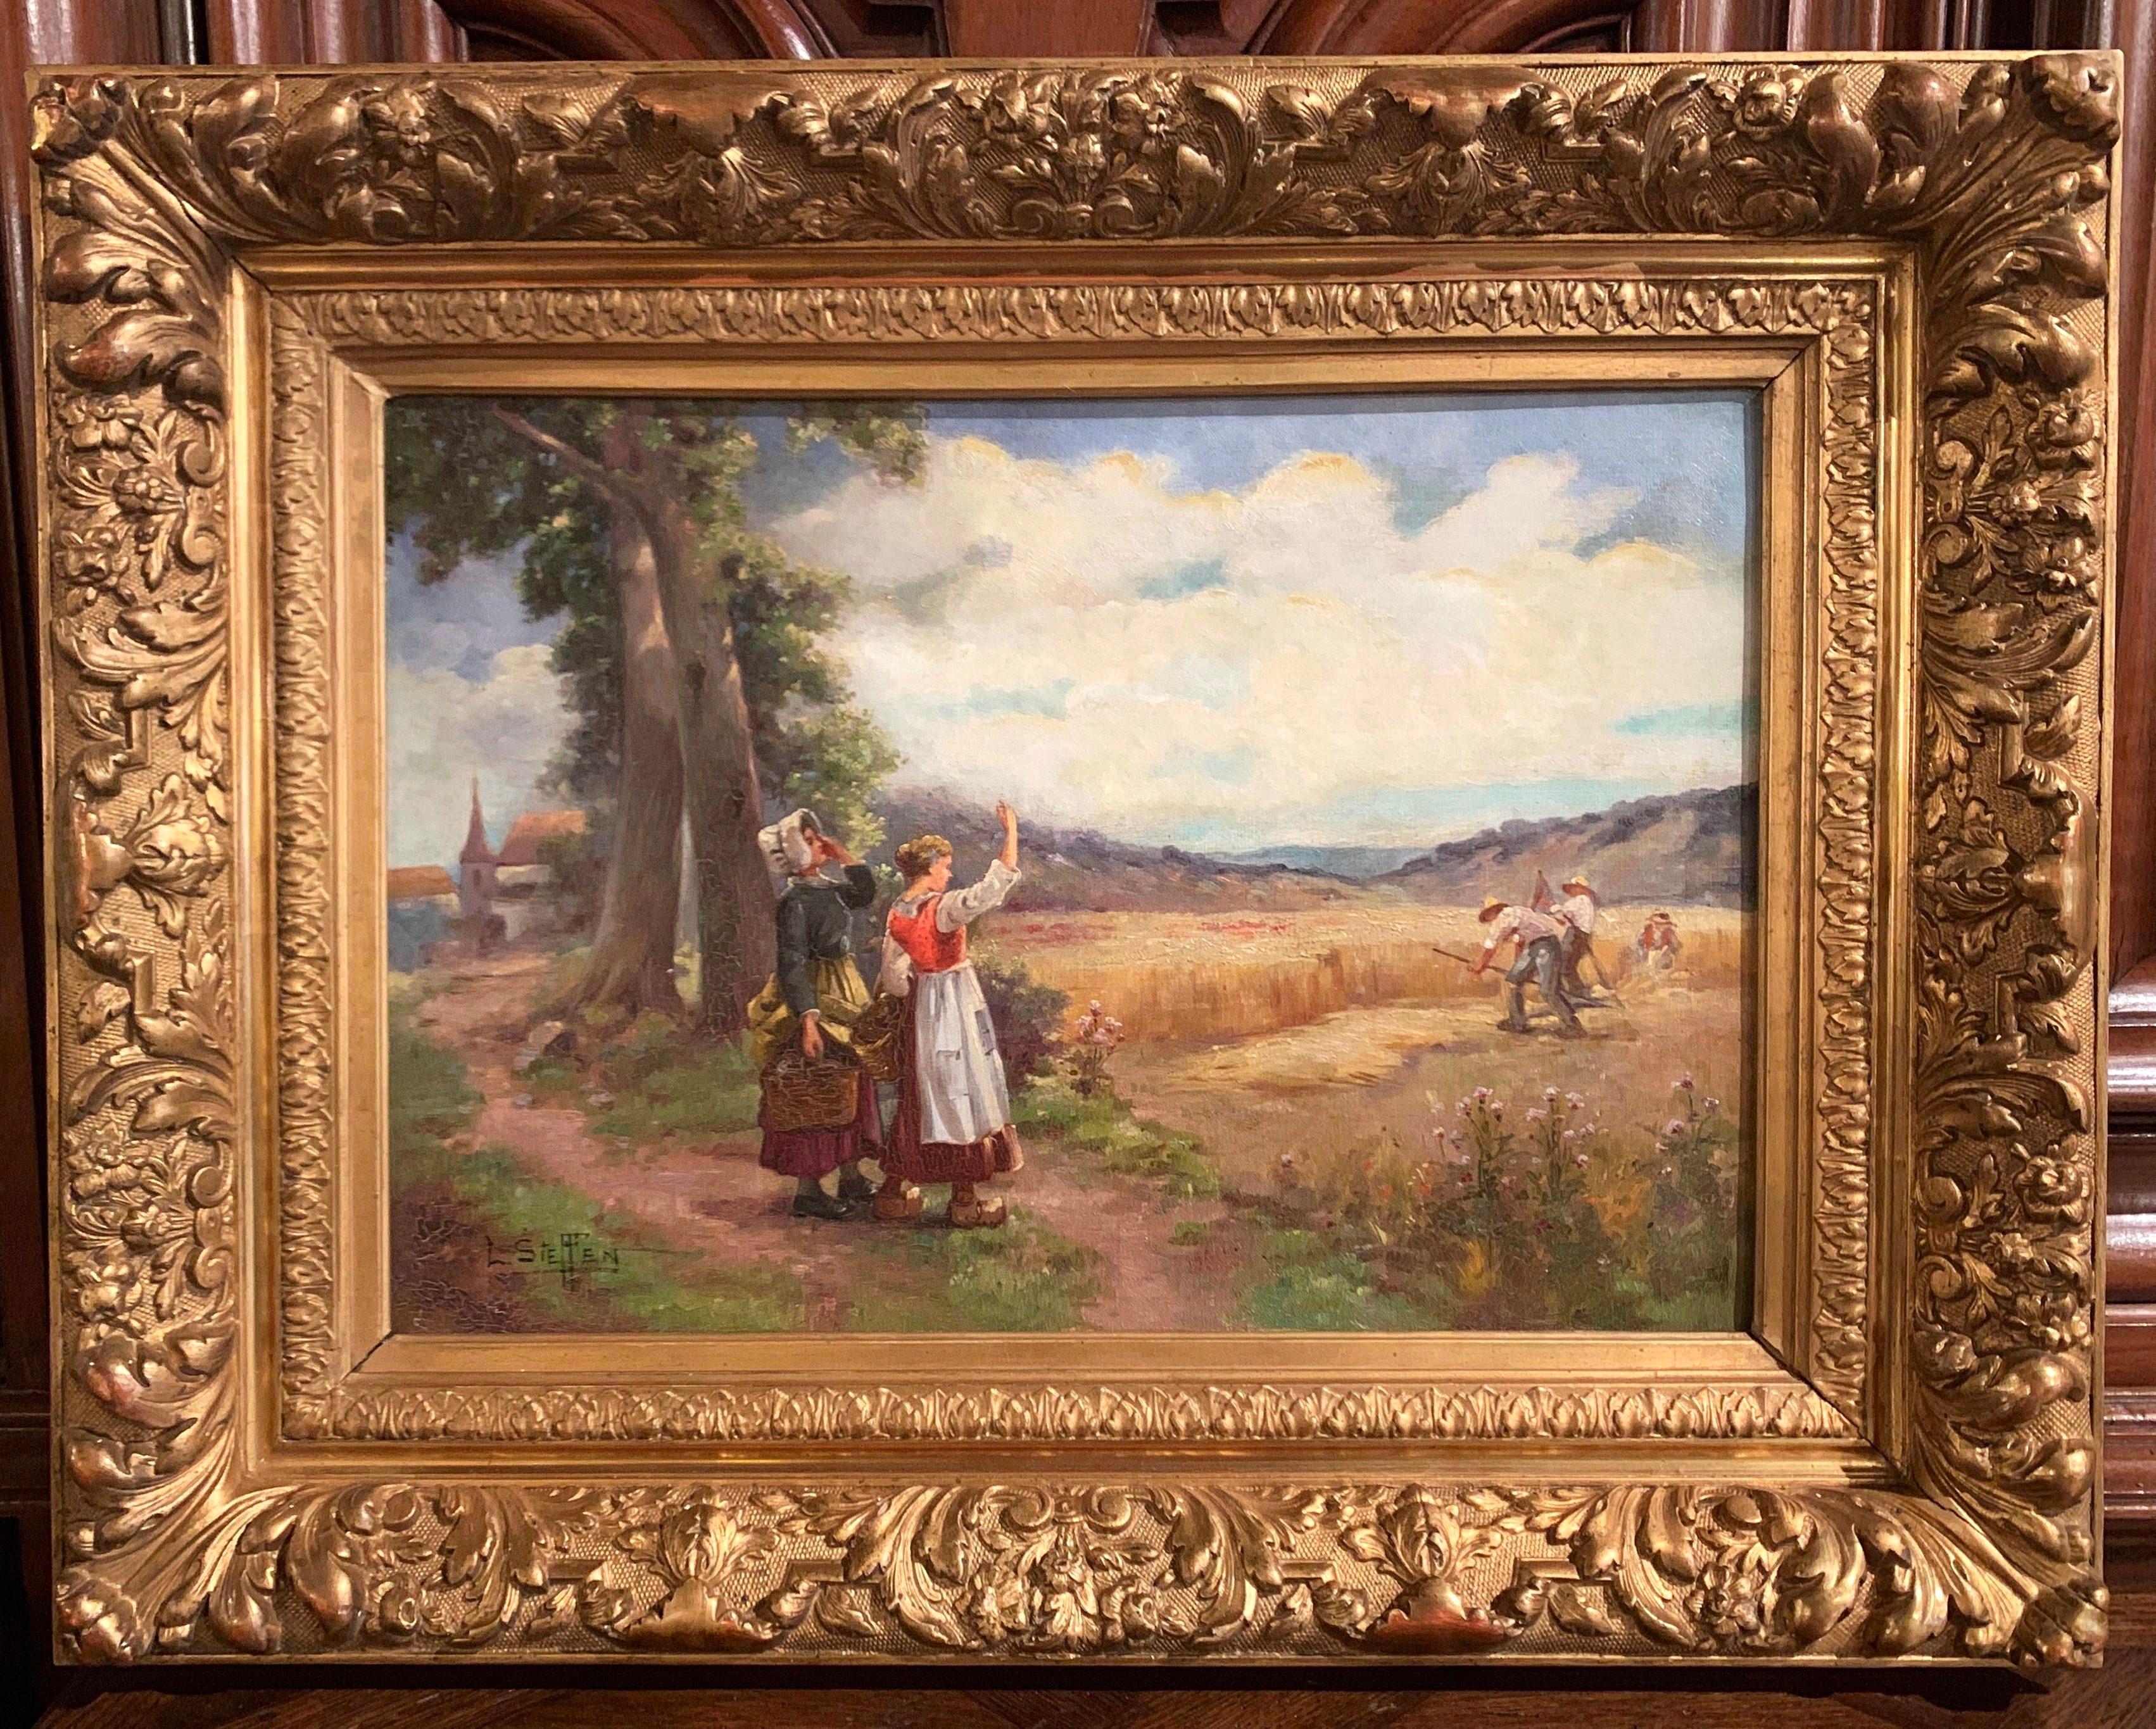 Created in France circa 1880 and set in the original carved giltwood frames, these two colorful paintings depict a pastoral scene with landscape, people and farm animals. One canvas signed Madrazi in the lower right corner, depicts a farmer with his